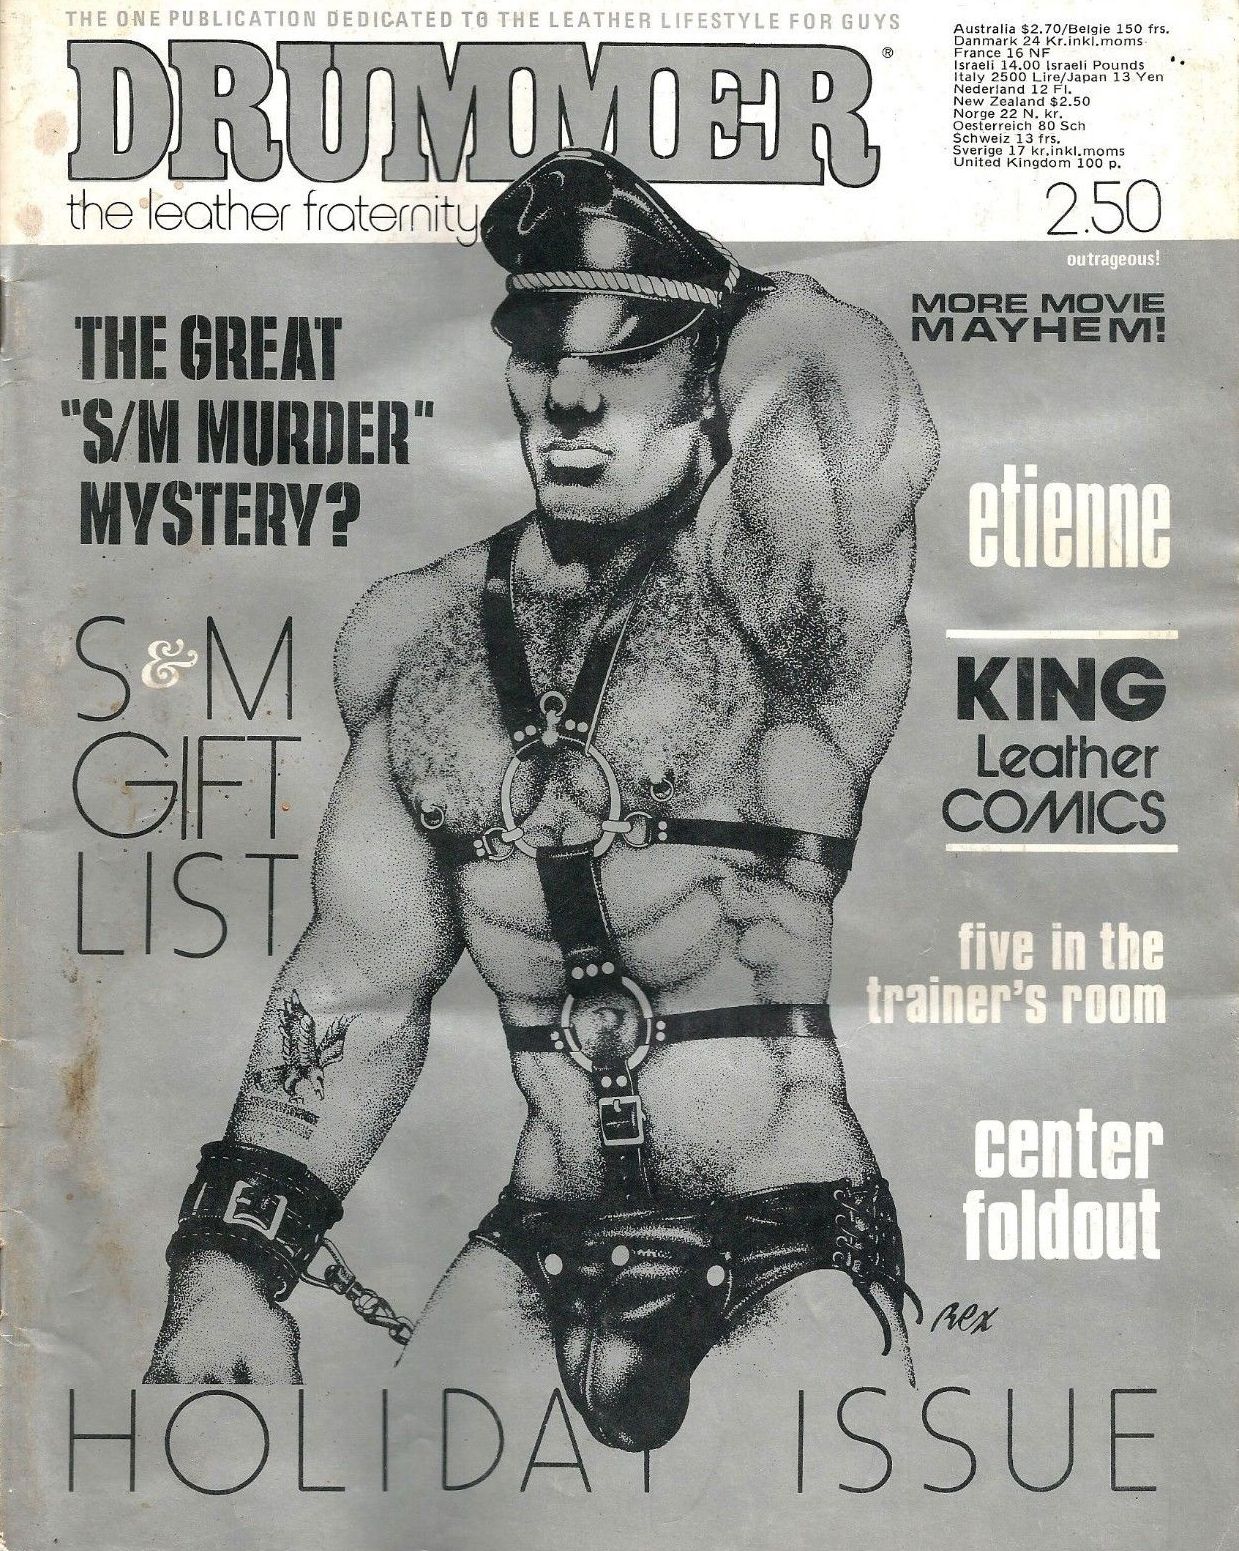 Drummer # 1 magazine back issue Drummer magizine back copy Drummer # 1 Gay Leather BDSM Subculture Adult Mens Magazine Back Issue Homosexual San Francisco Publishing. The Great S/M MurderMystery?.